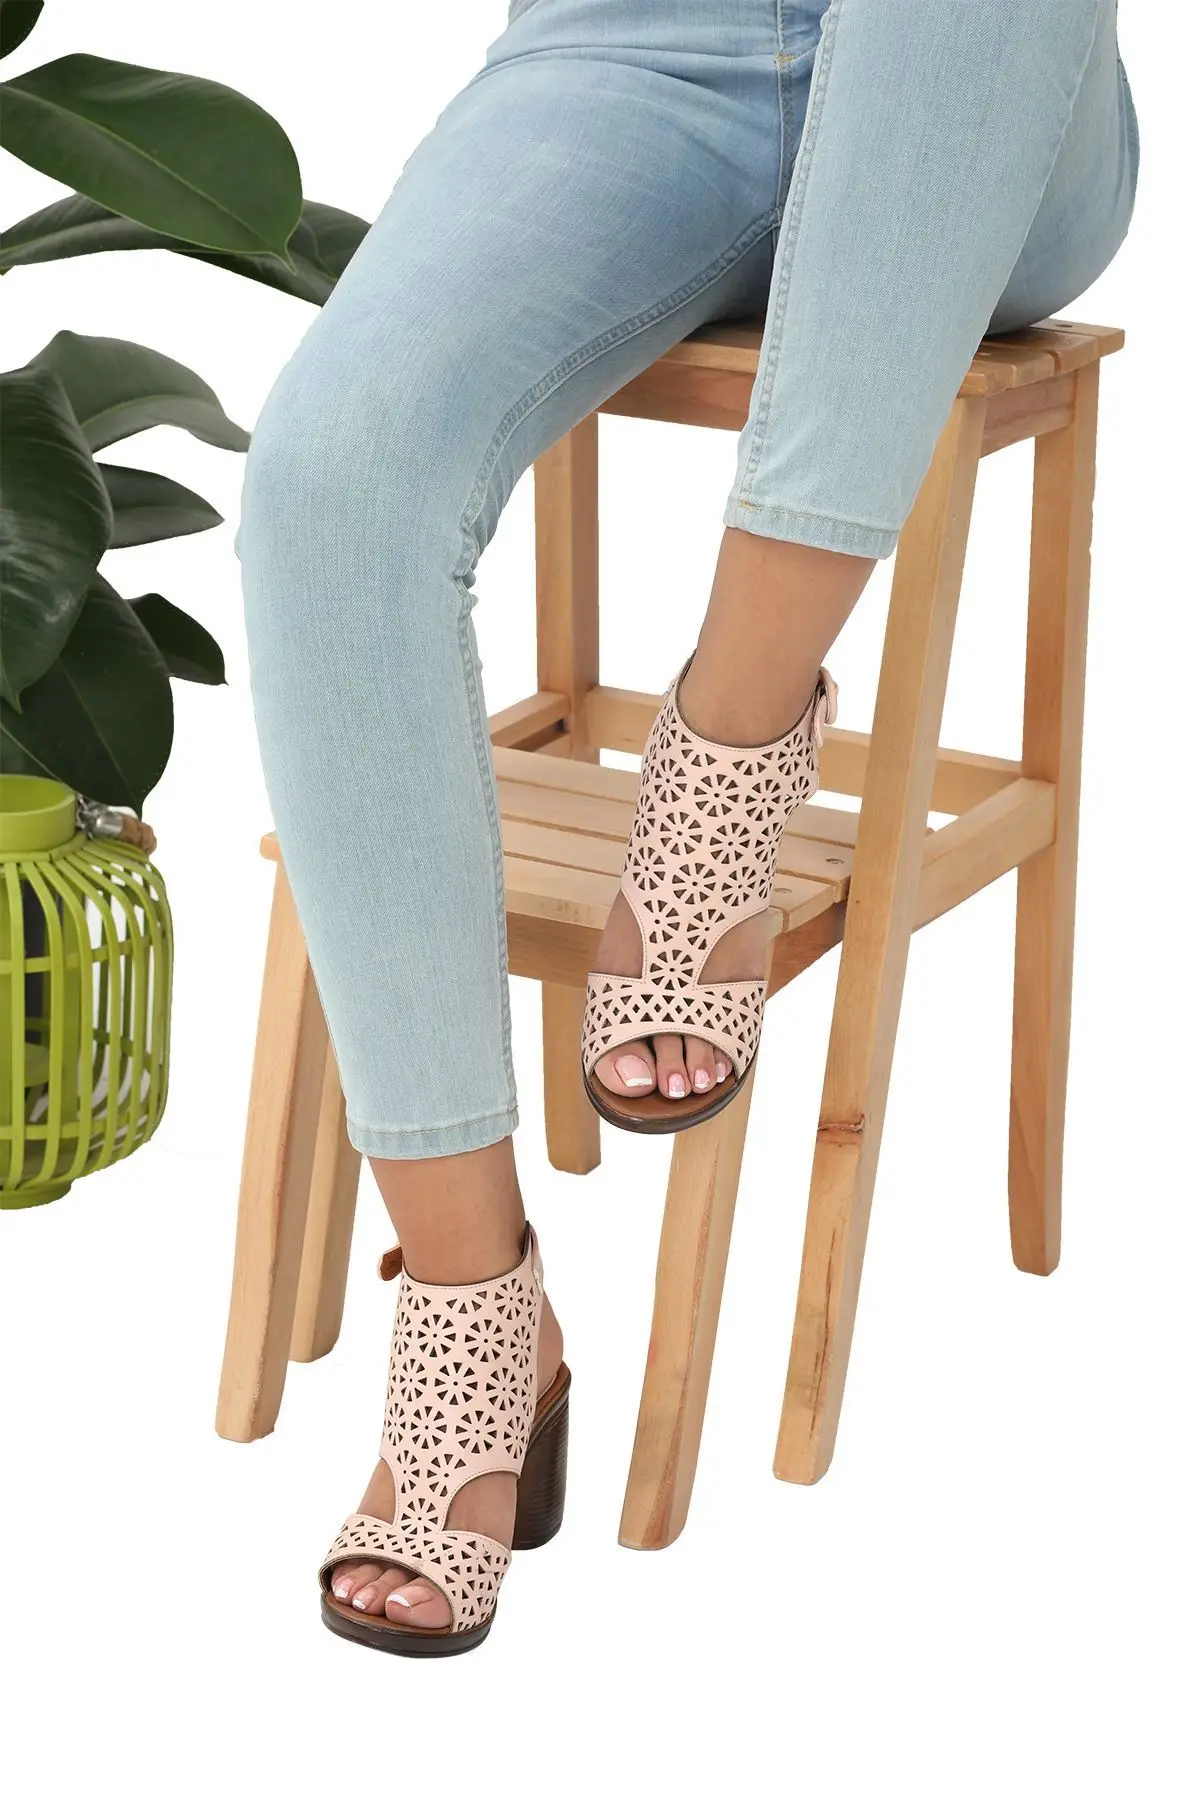 Women Heels Shoes Sandals Summer New Shoes Female Gladiator Rome Motif Ankle Strap Open Toe High Heel Women's Shoes 2021 Summer